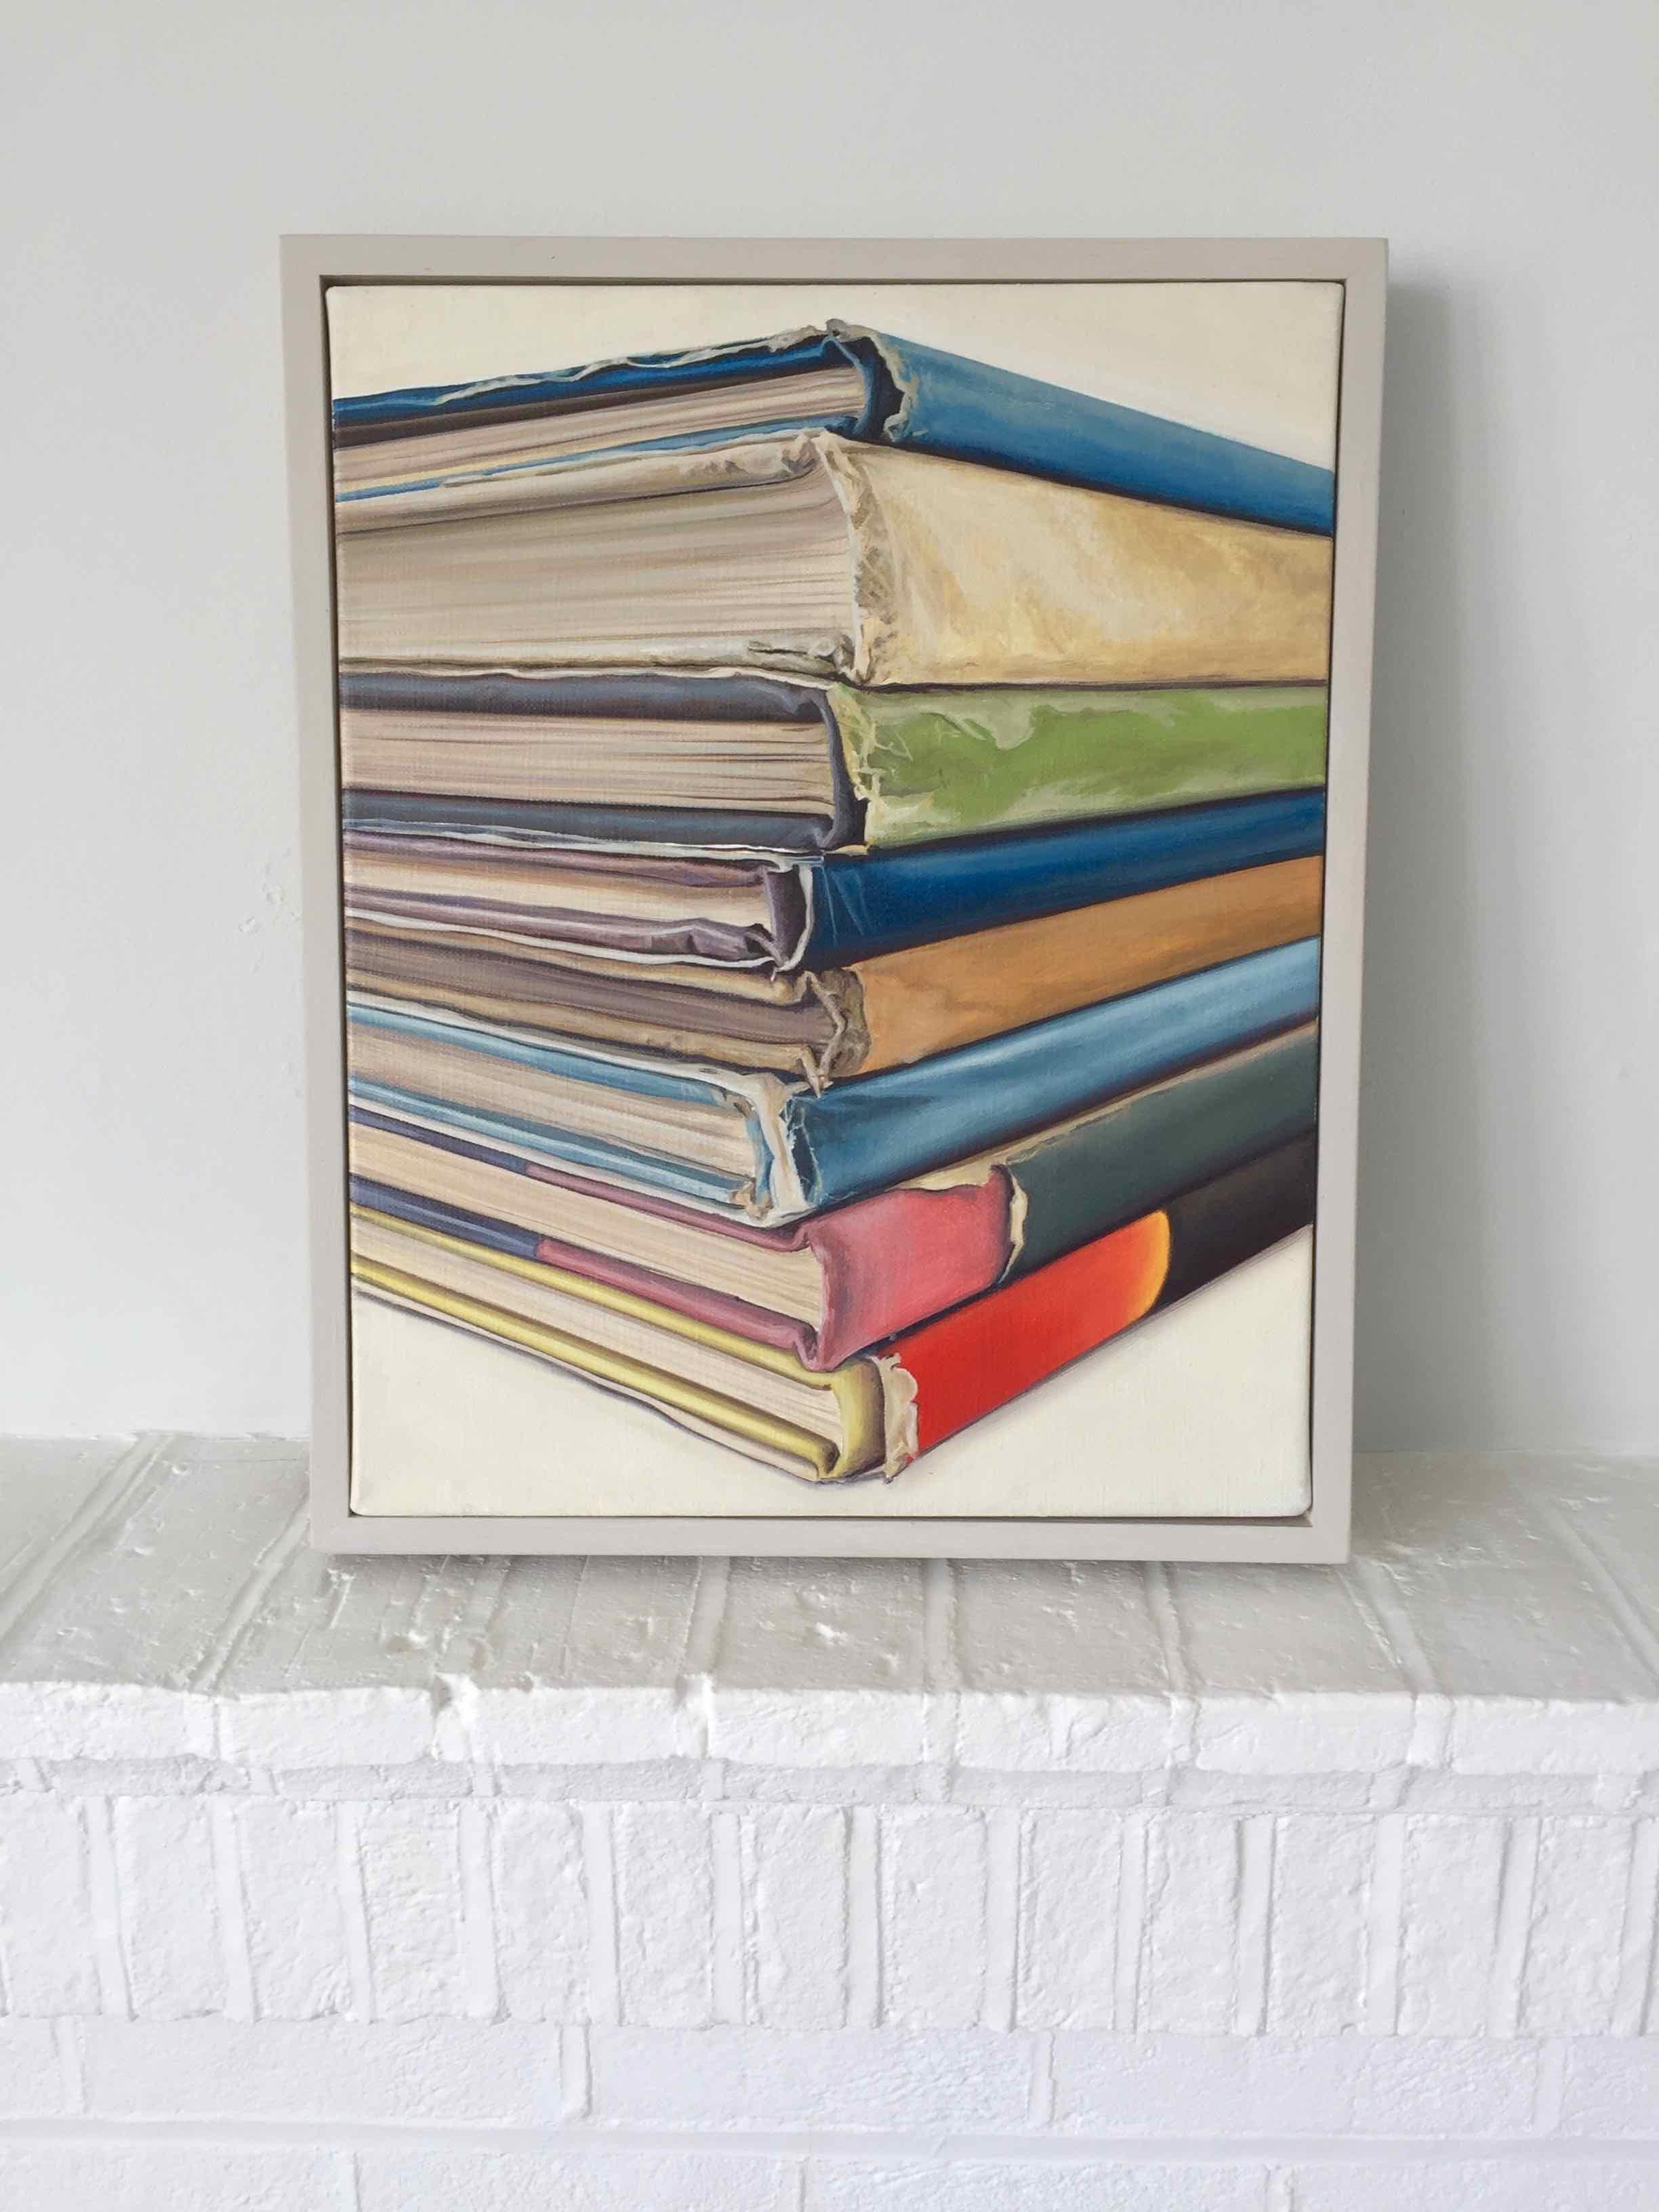 This colourful painting of a bookstack is based on Ian’s time spent in the studio of the famed painter, Patrick Hughes. It is painted on stretched linen and set in a pale grey wooden tray frame. Very fitting for a library or study.

Ian Robinson’s